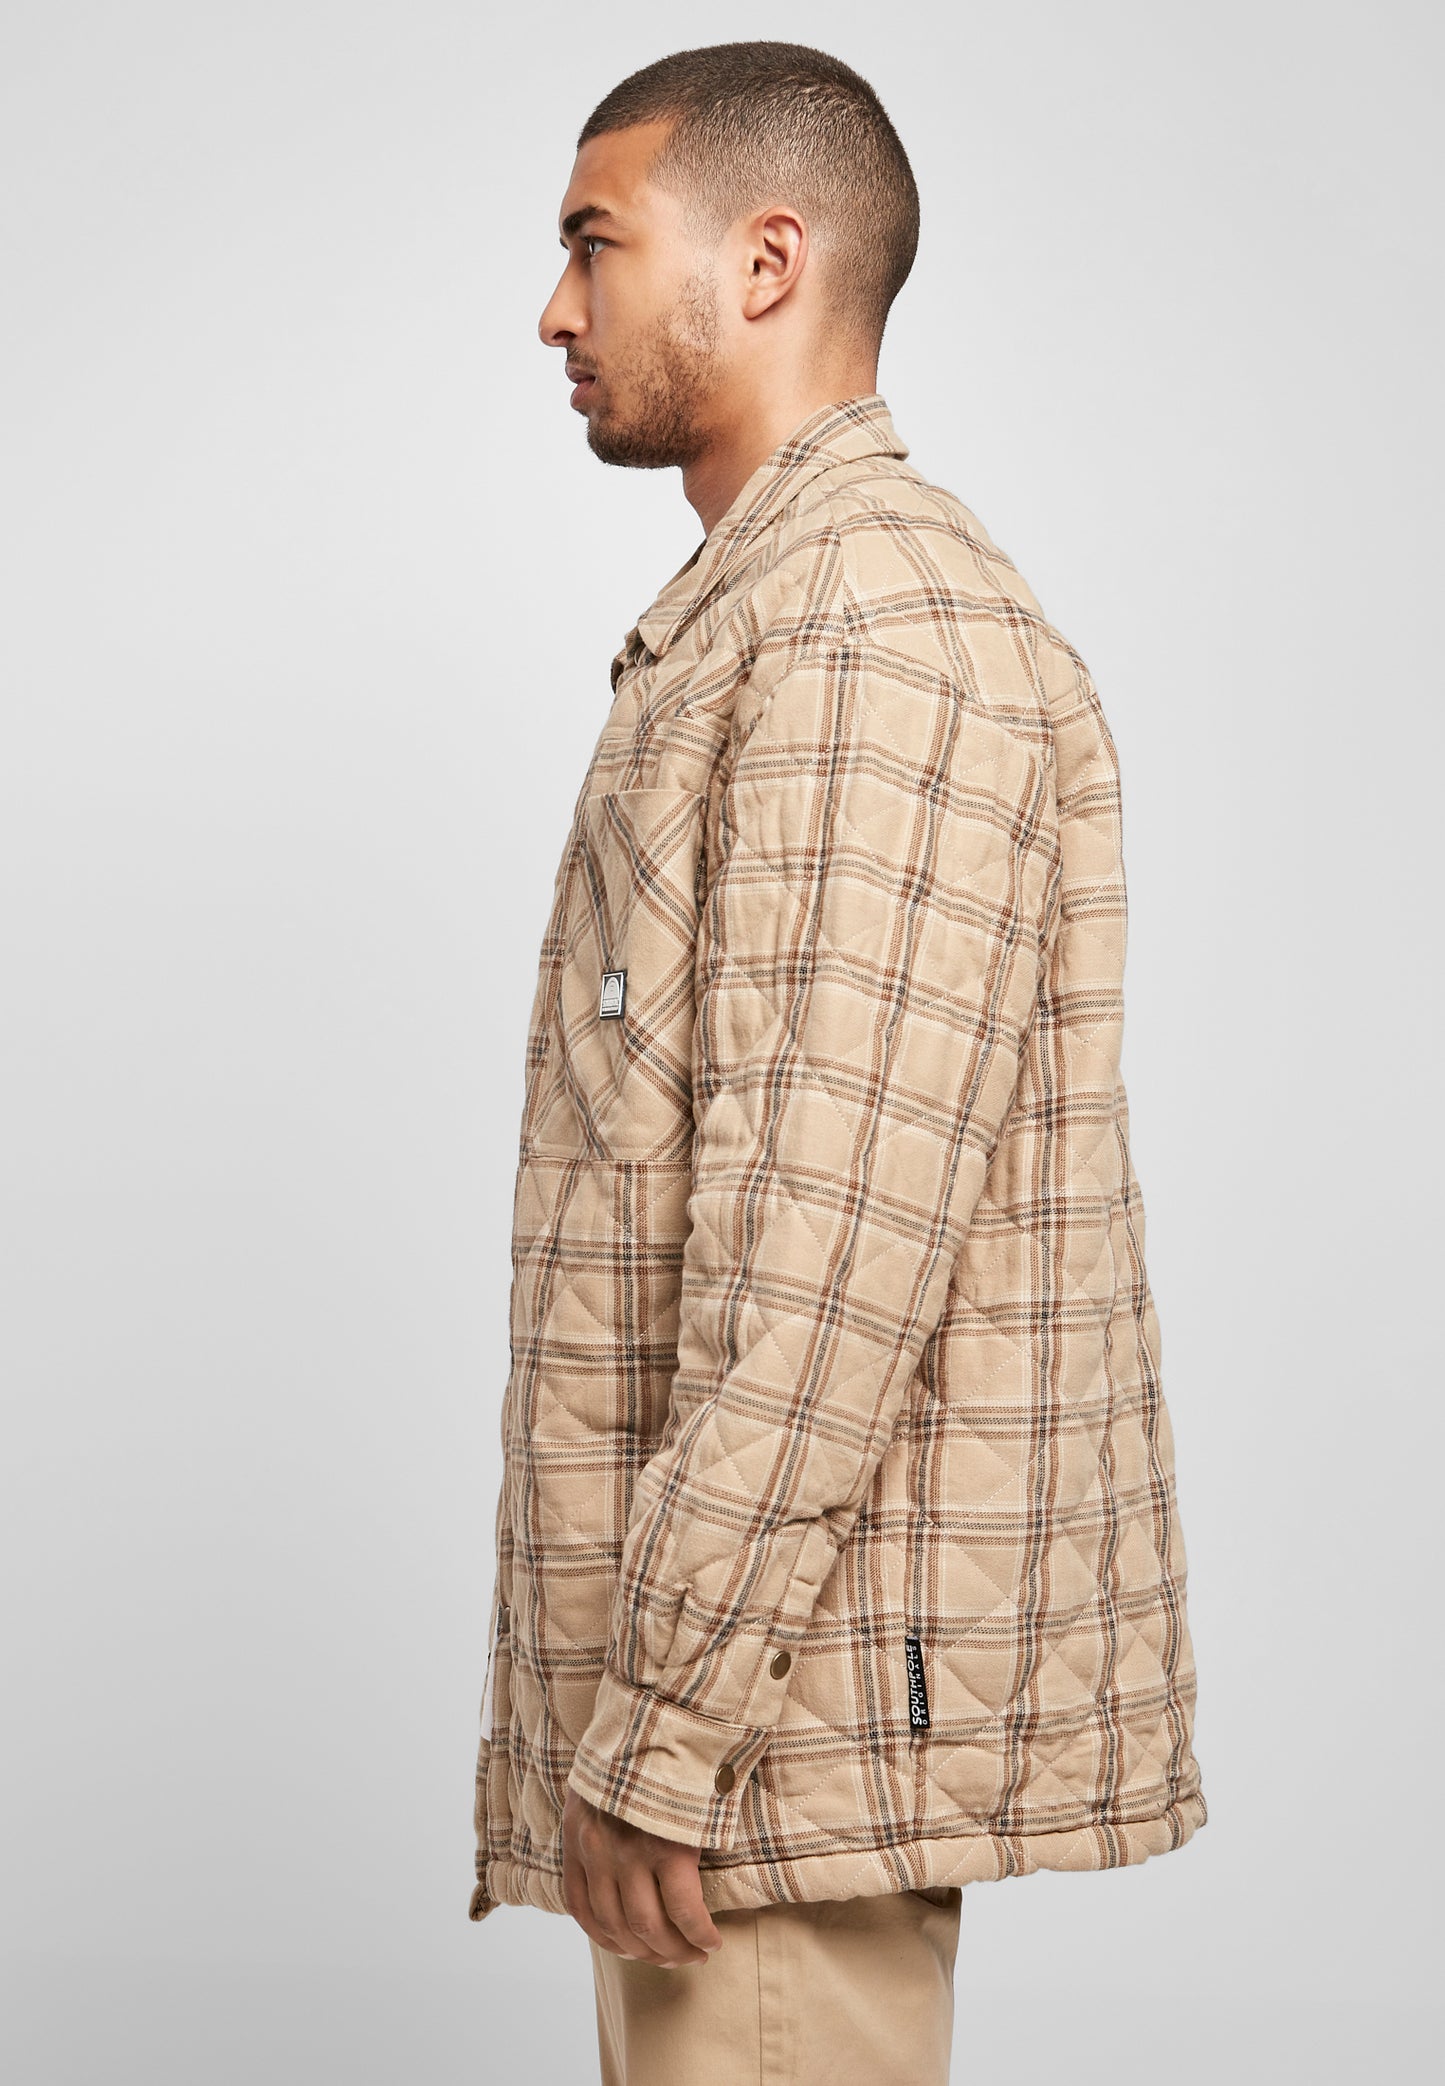 Southpole Flannel Quilted Shirt Jacke in Warm Sand